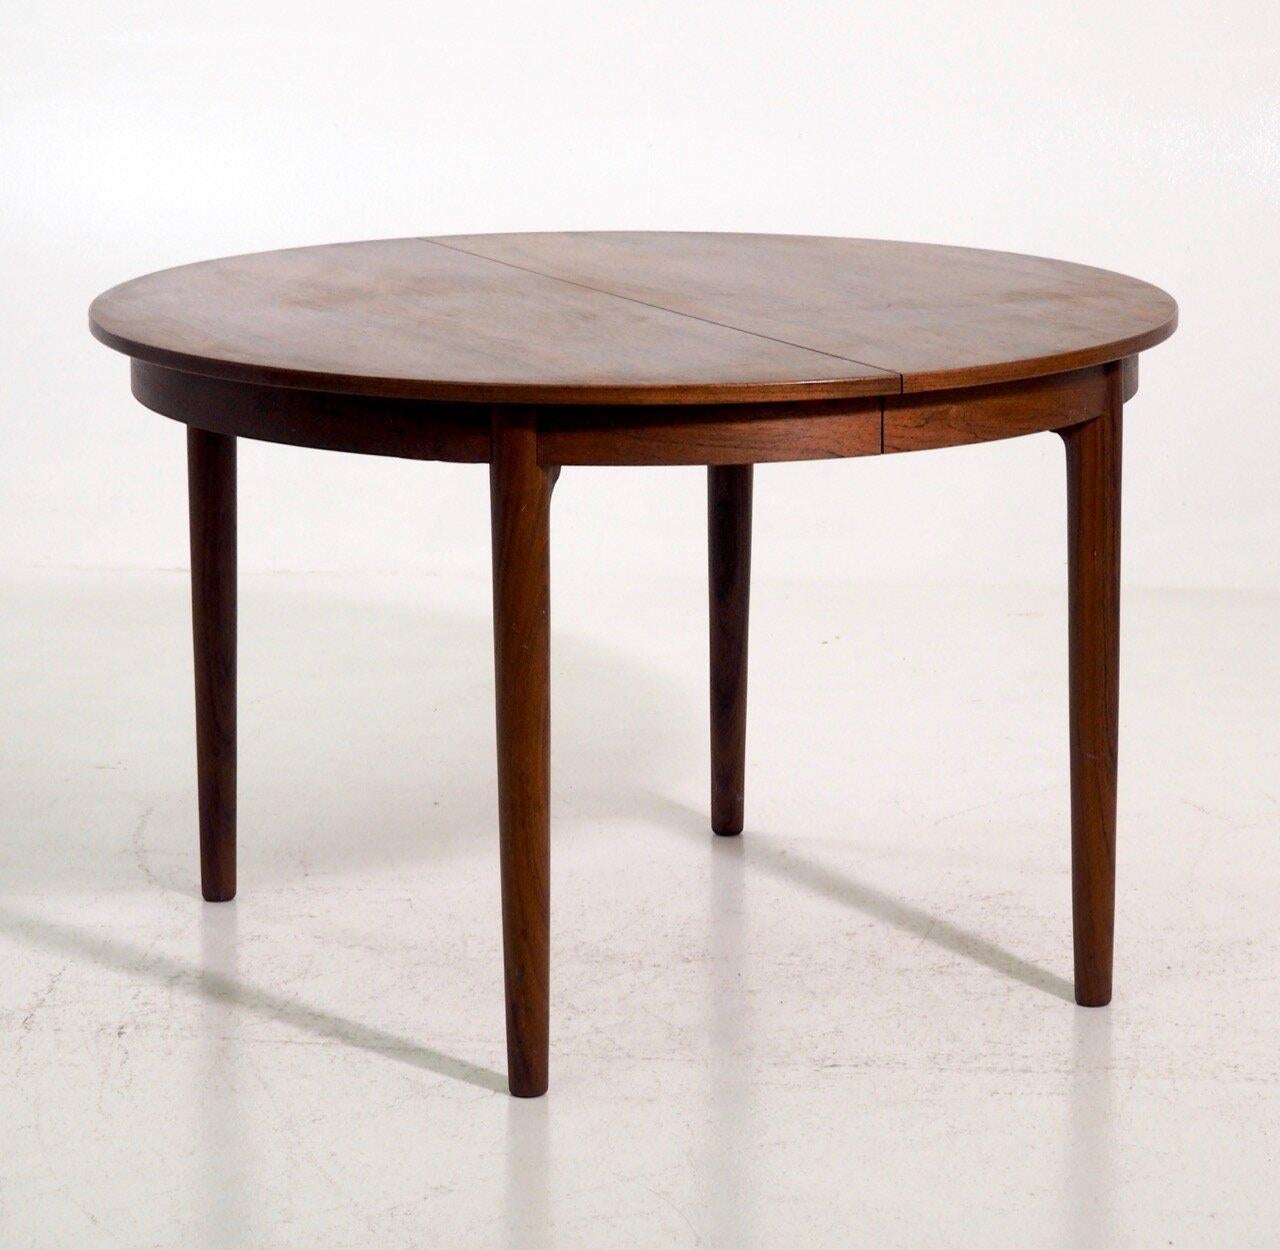 Extension table with one leave in fruitwood, 1960’s. Probably made by an important Danish designer.